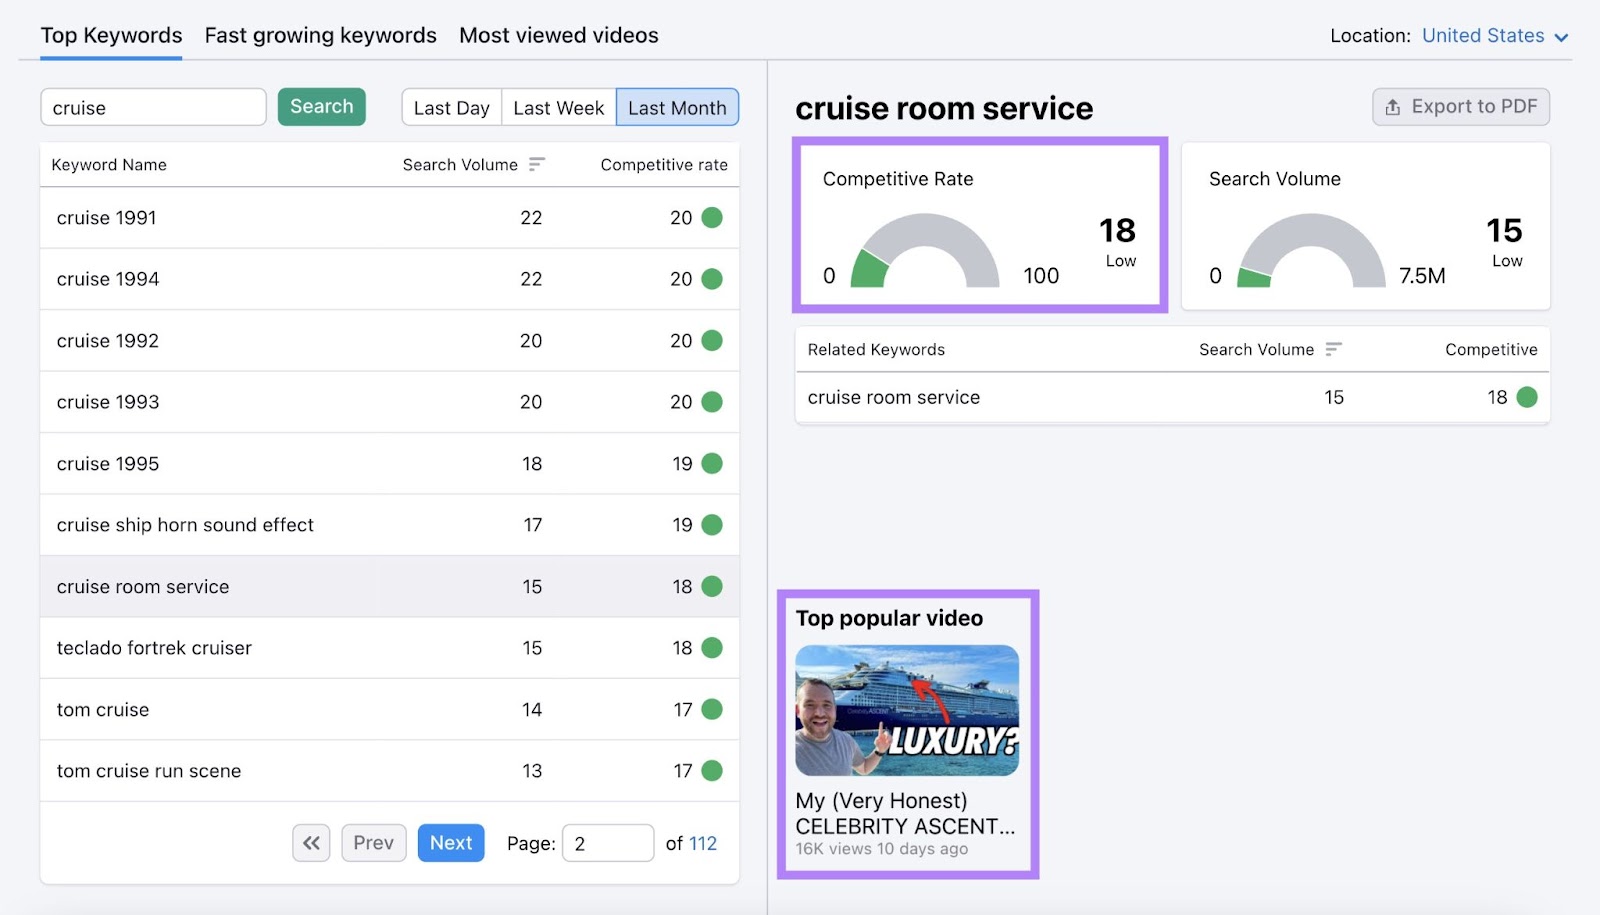 Results for "cruise" with top popular video section highlighted